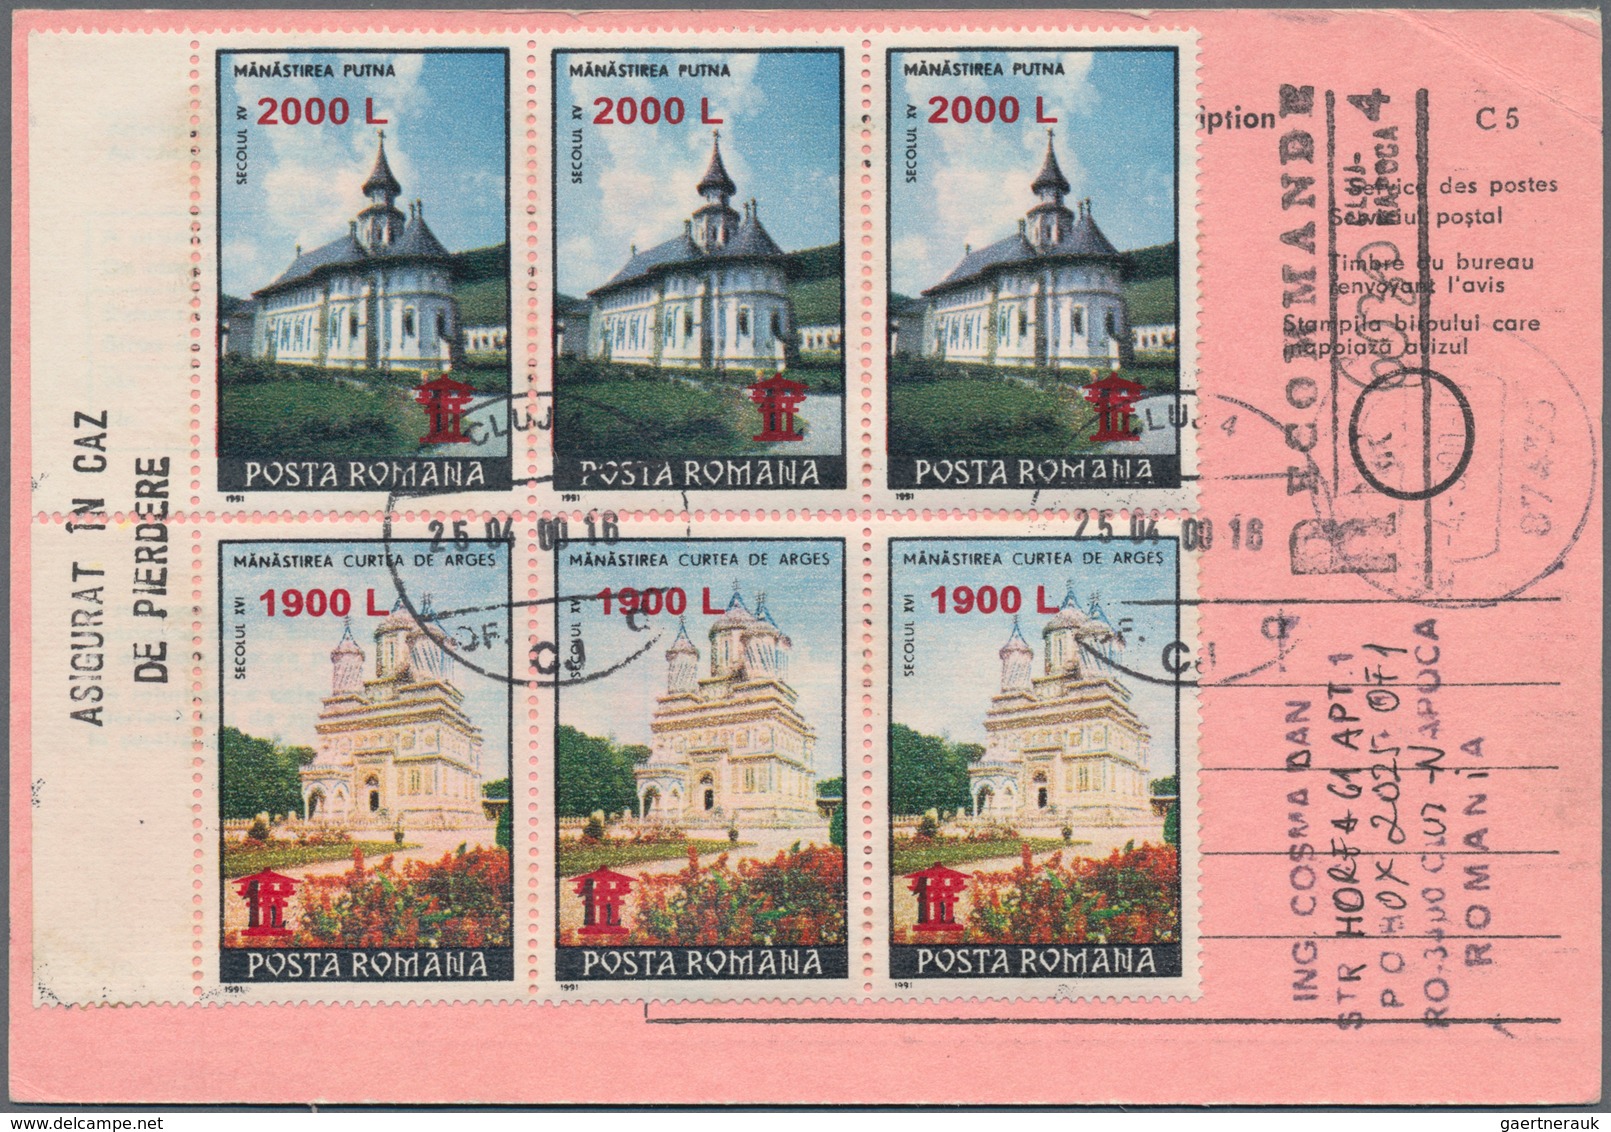 Rumänien: 1960/2007, holding of apprx. 480 covers showing a vast range of interesting frankings incl